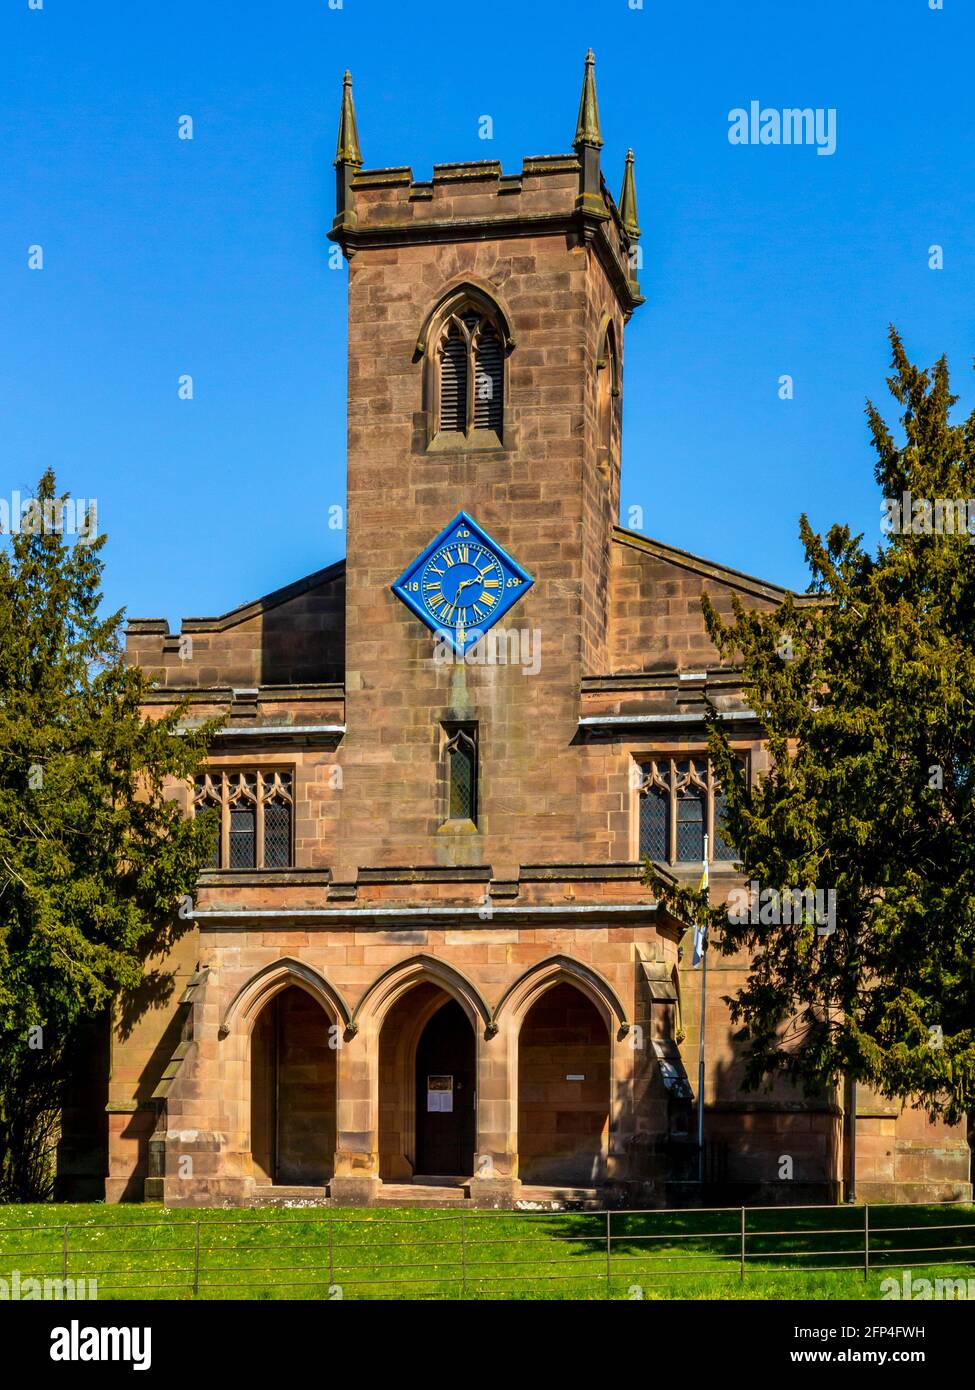 St Mary's Church in Cromford Derbyshire England a grade 1 listed building where Sir Richard Arkwright who built nearby Cromford Mill is buried. Stock Photo